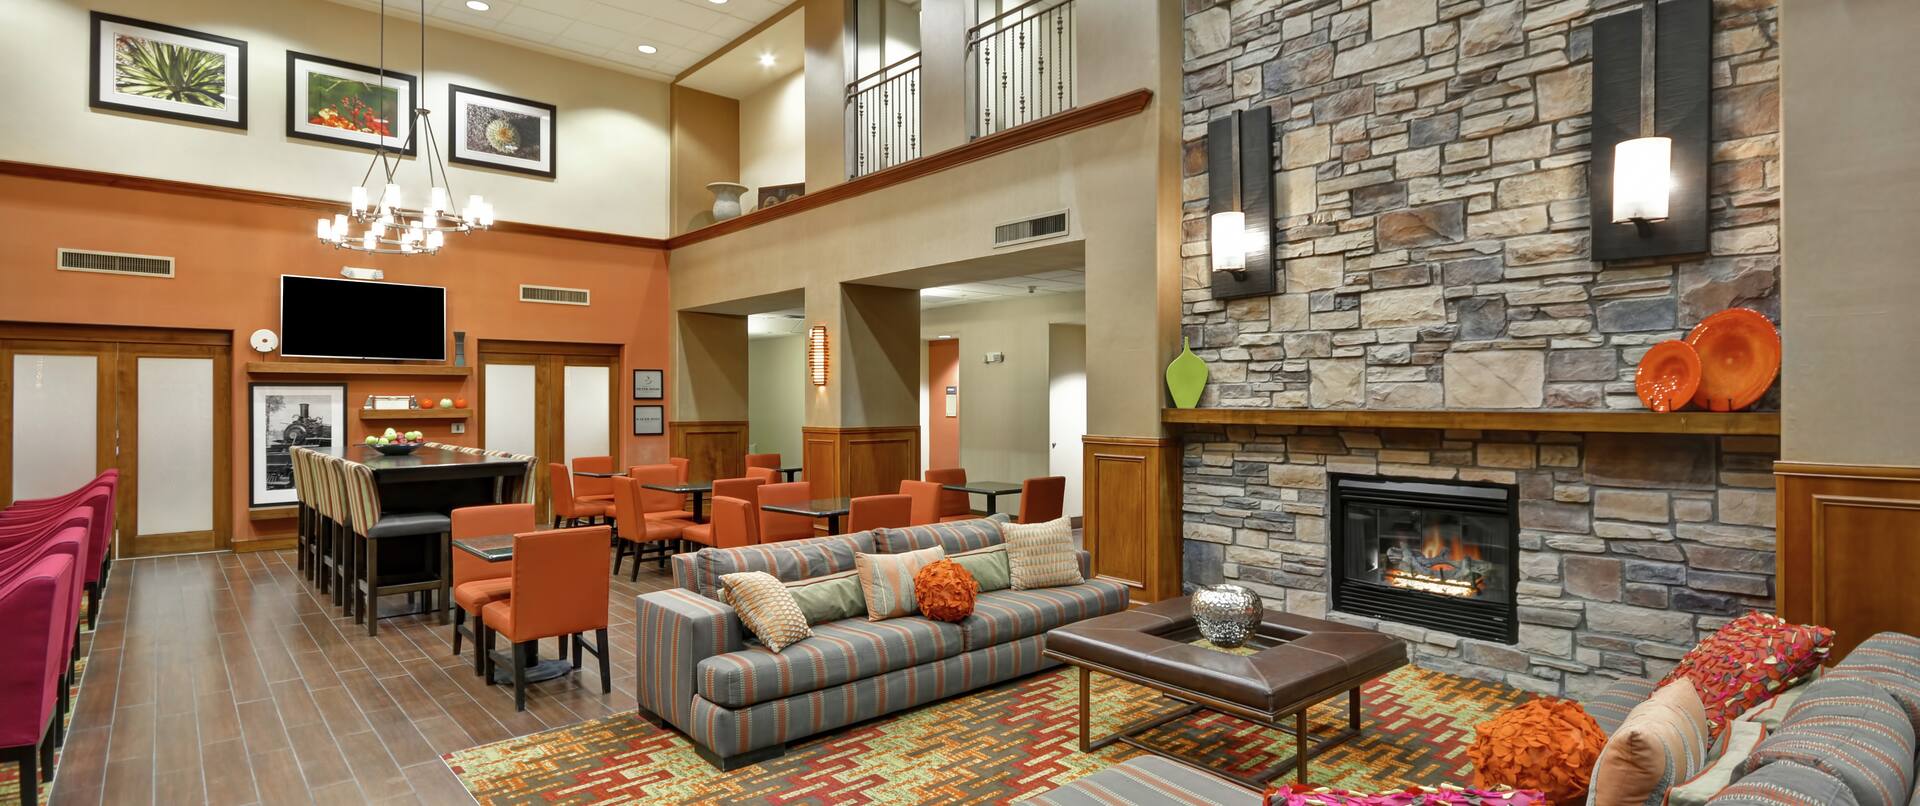 Lobby Lounge Area with Fireplace 